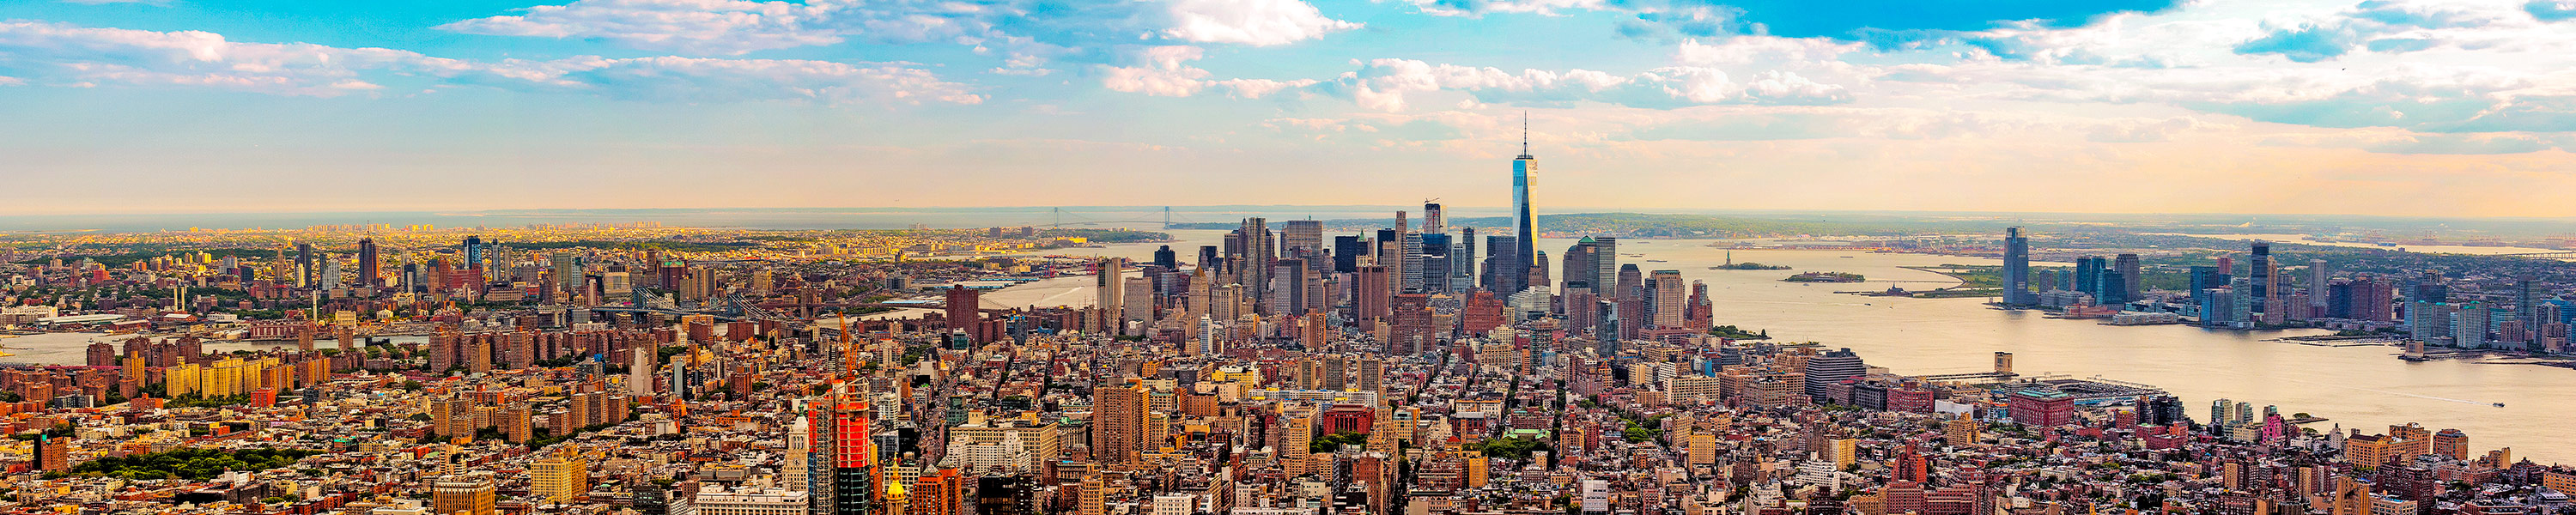 Manhattan From Empire State Building New York NY - Panorama Photography By Sean Rose